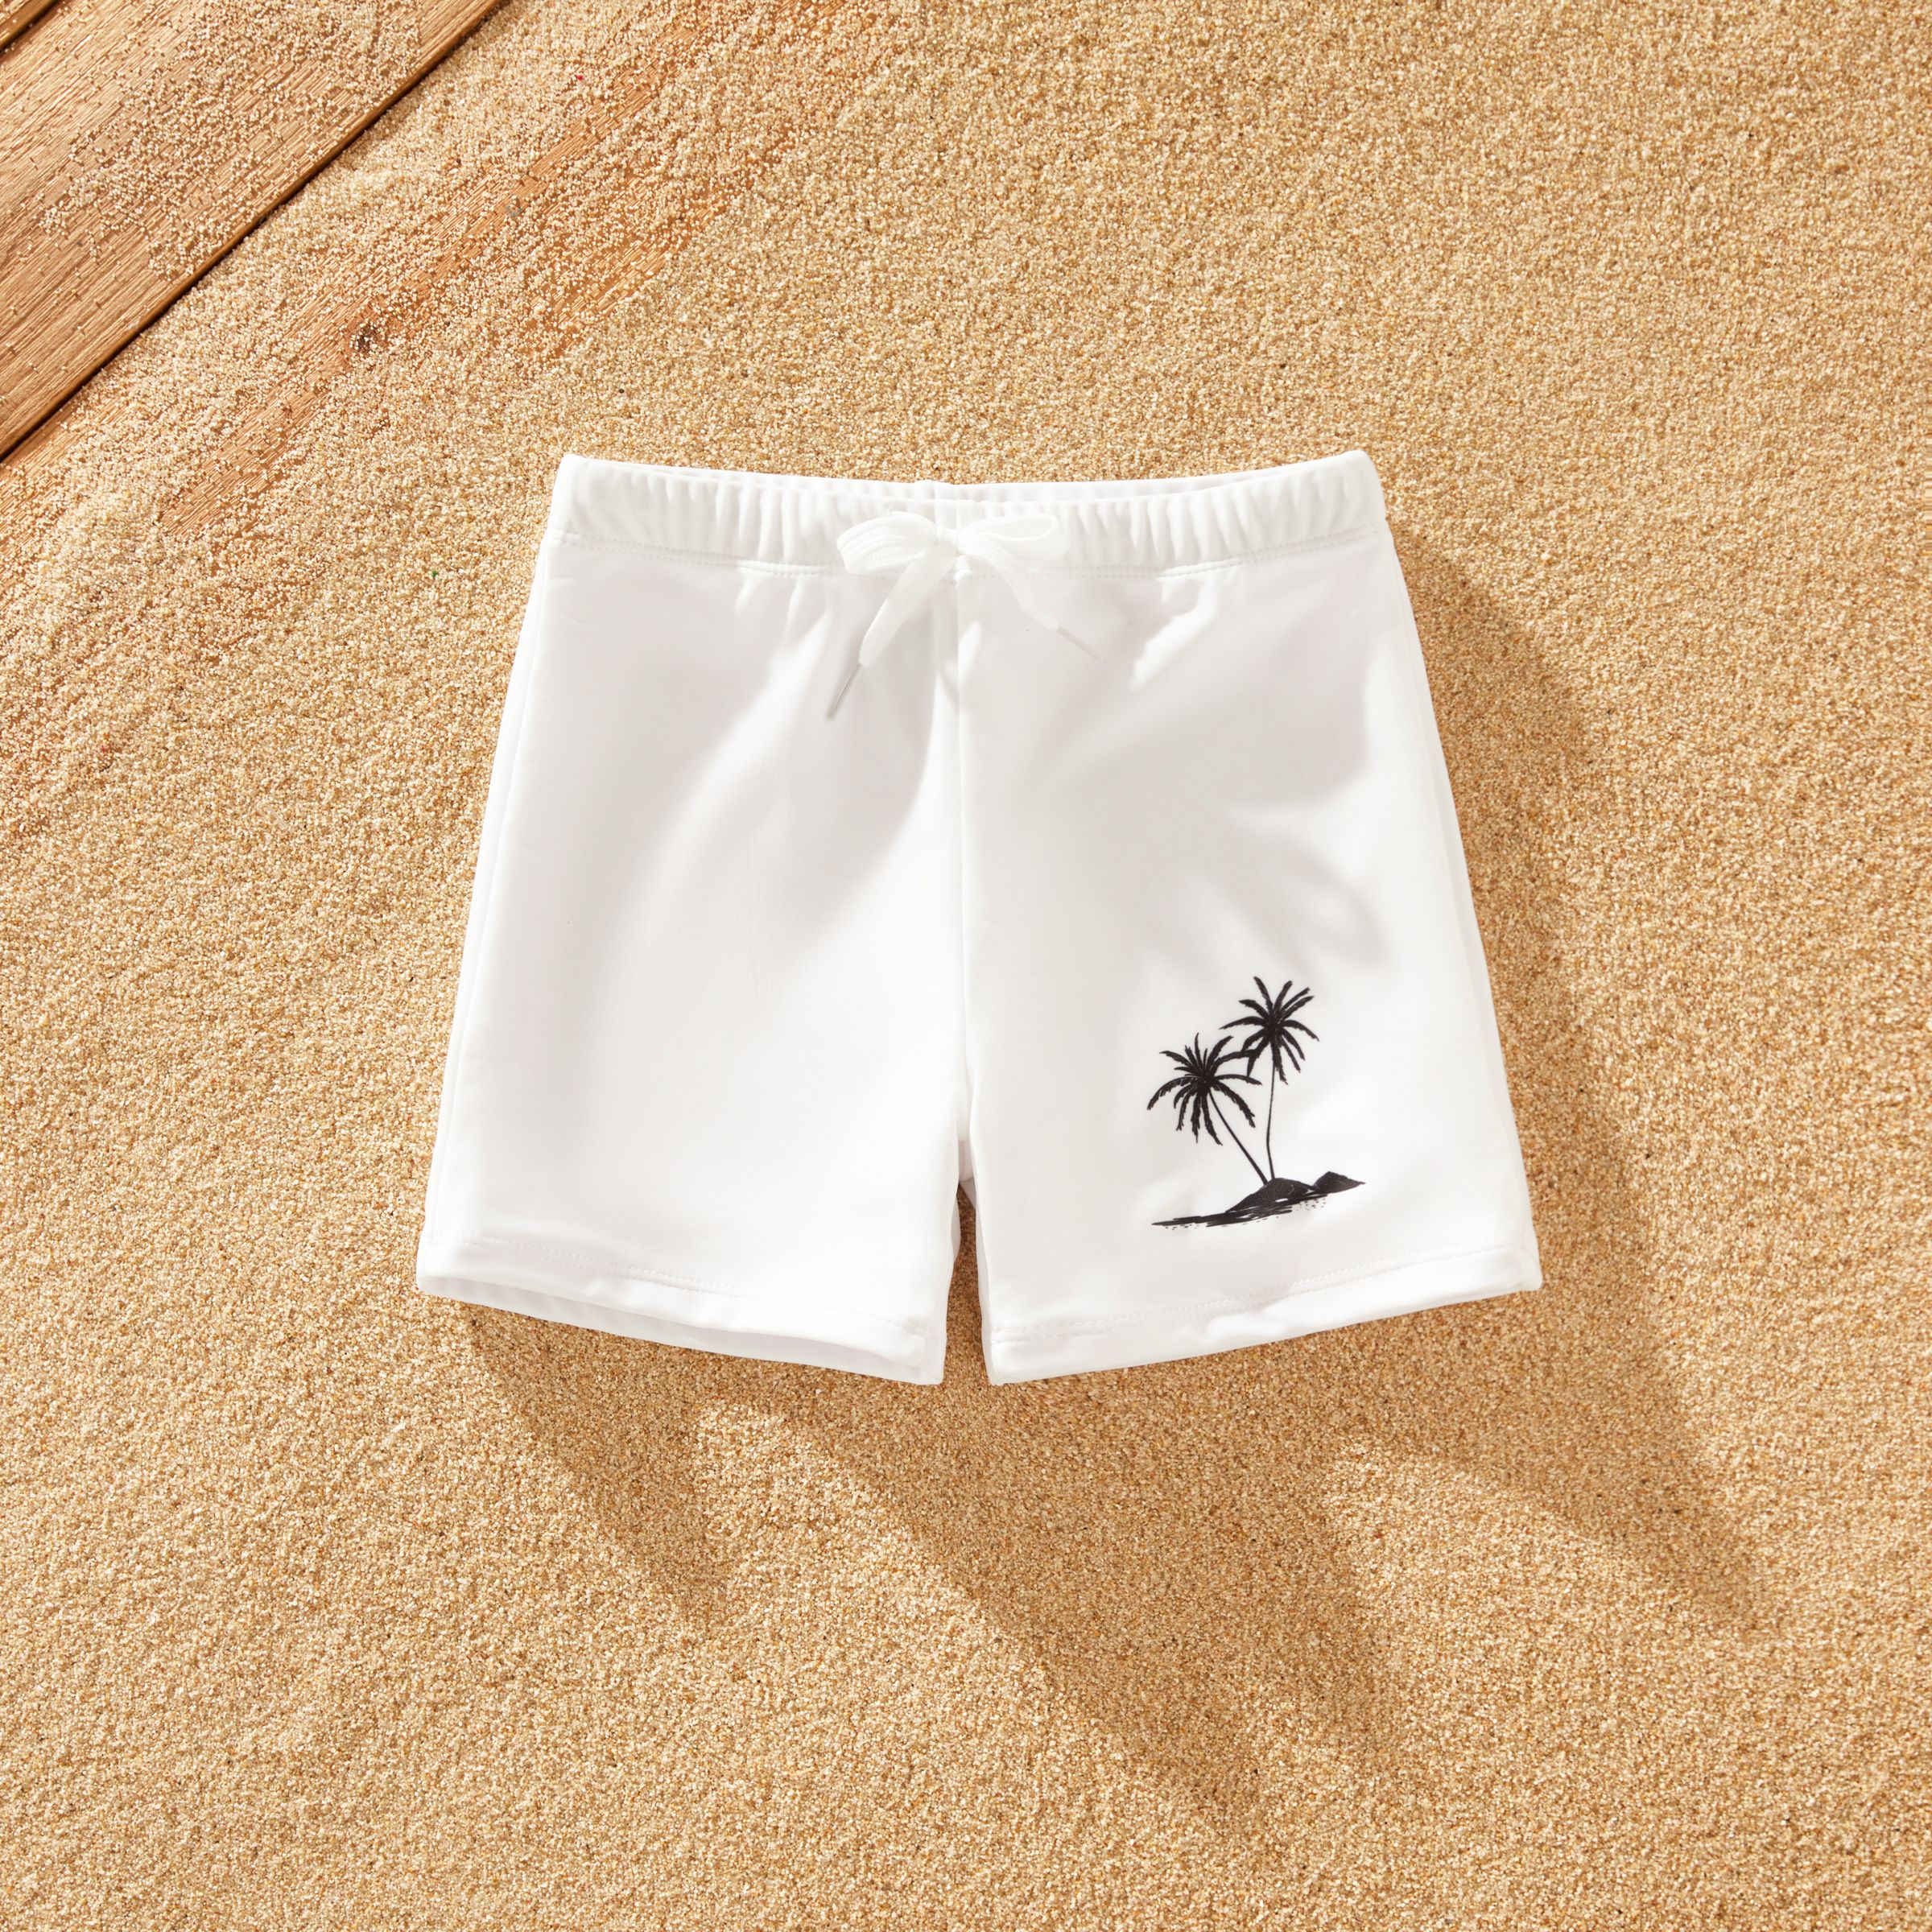 Family Matching Drawstring Swim Trunks or White Bow Accent Eyelet Strap One-Piece Swimsuit